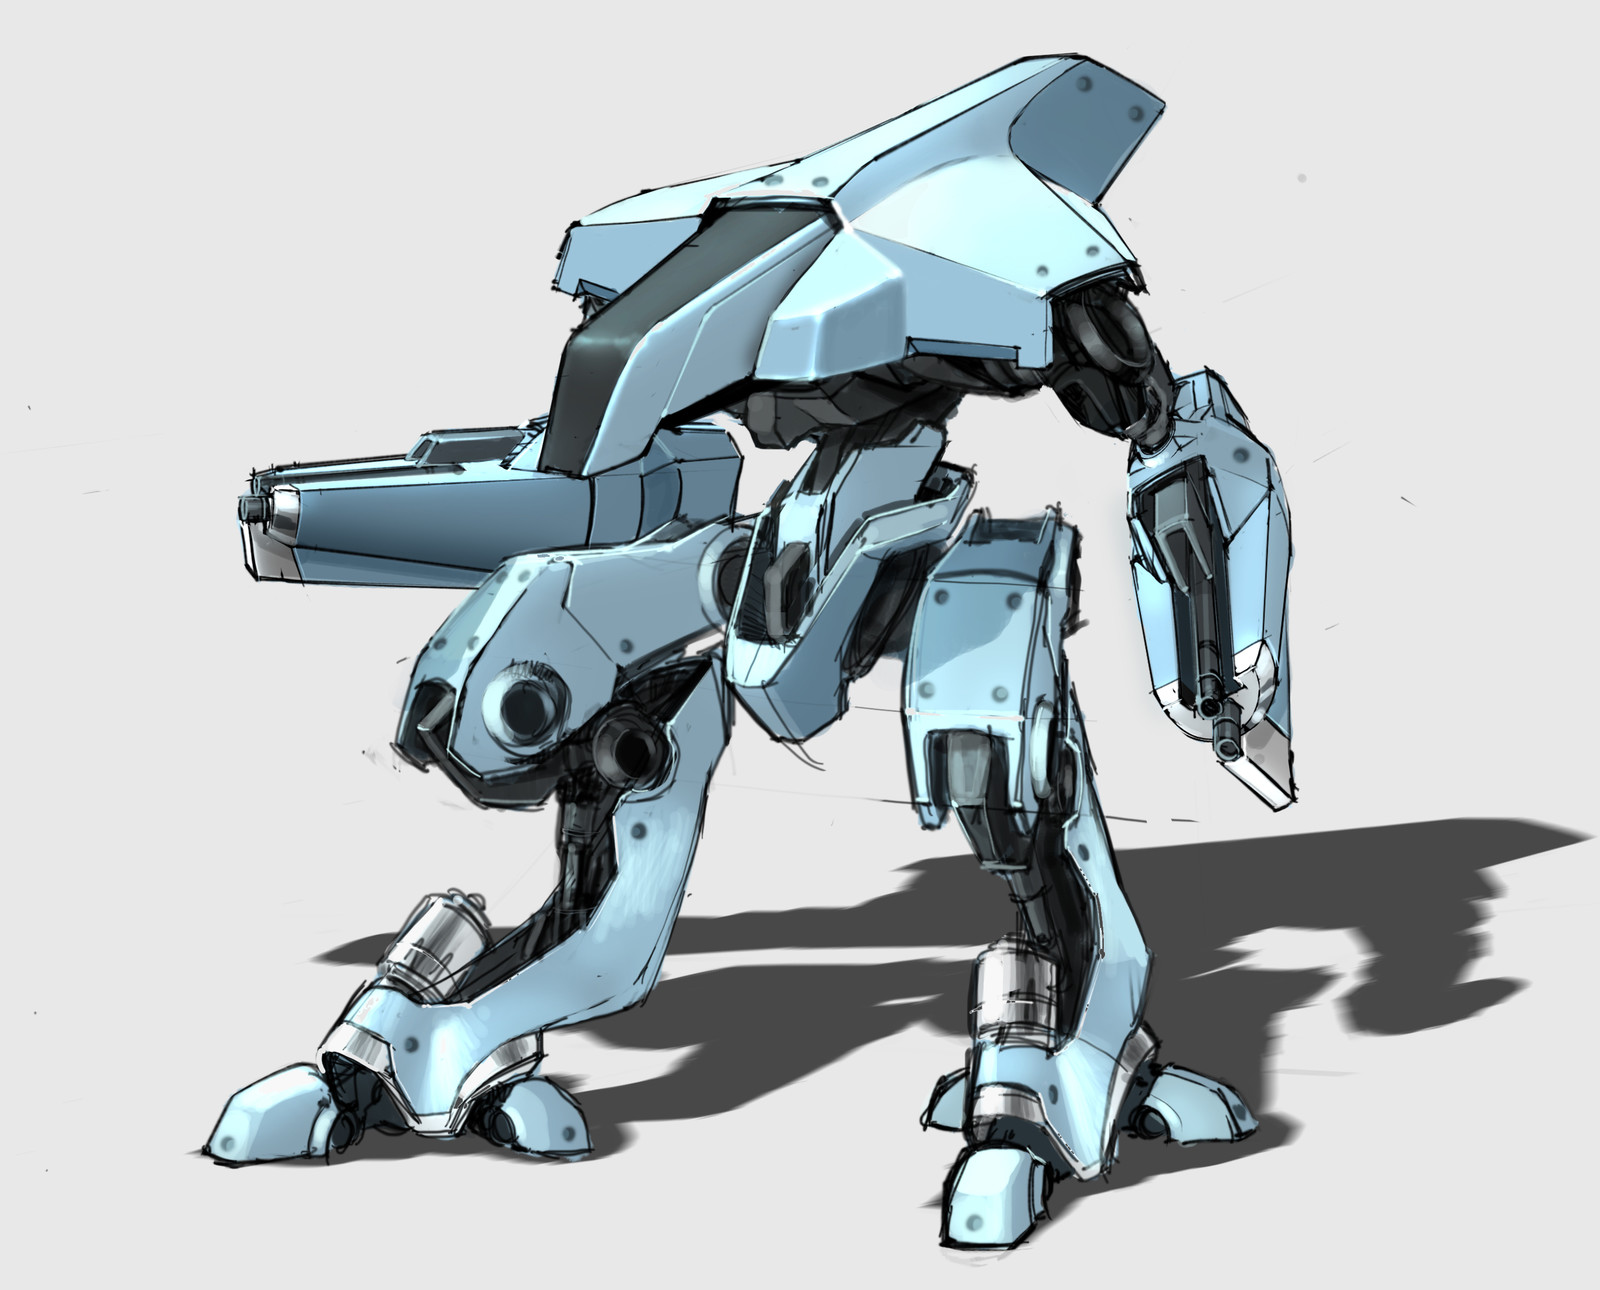 My first (very old) first attempt at a ED-209 redesign